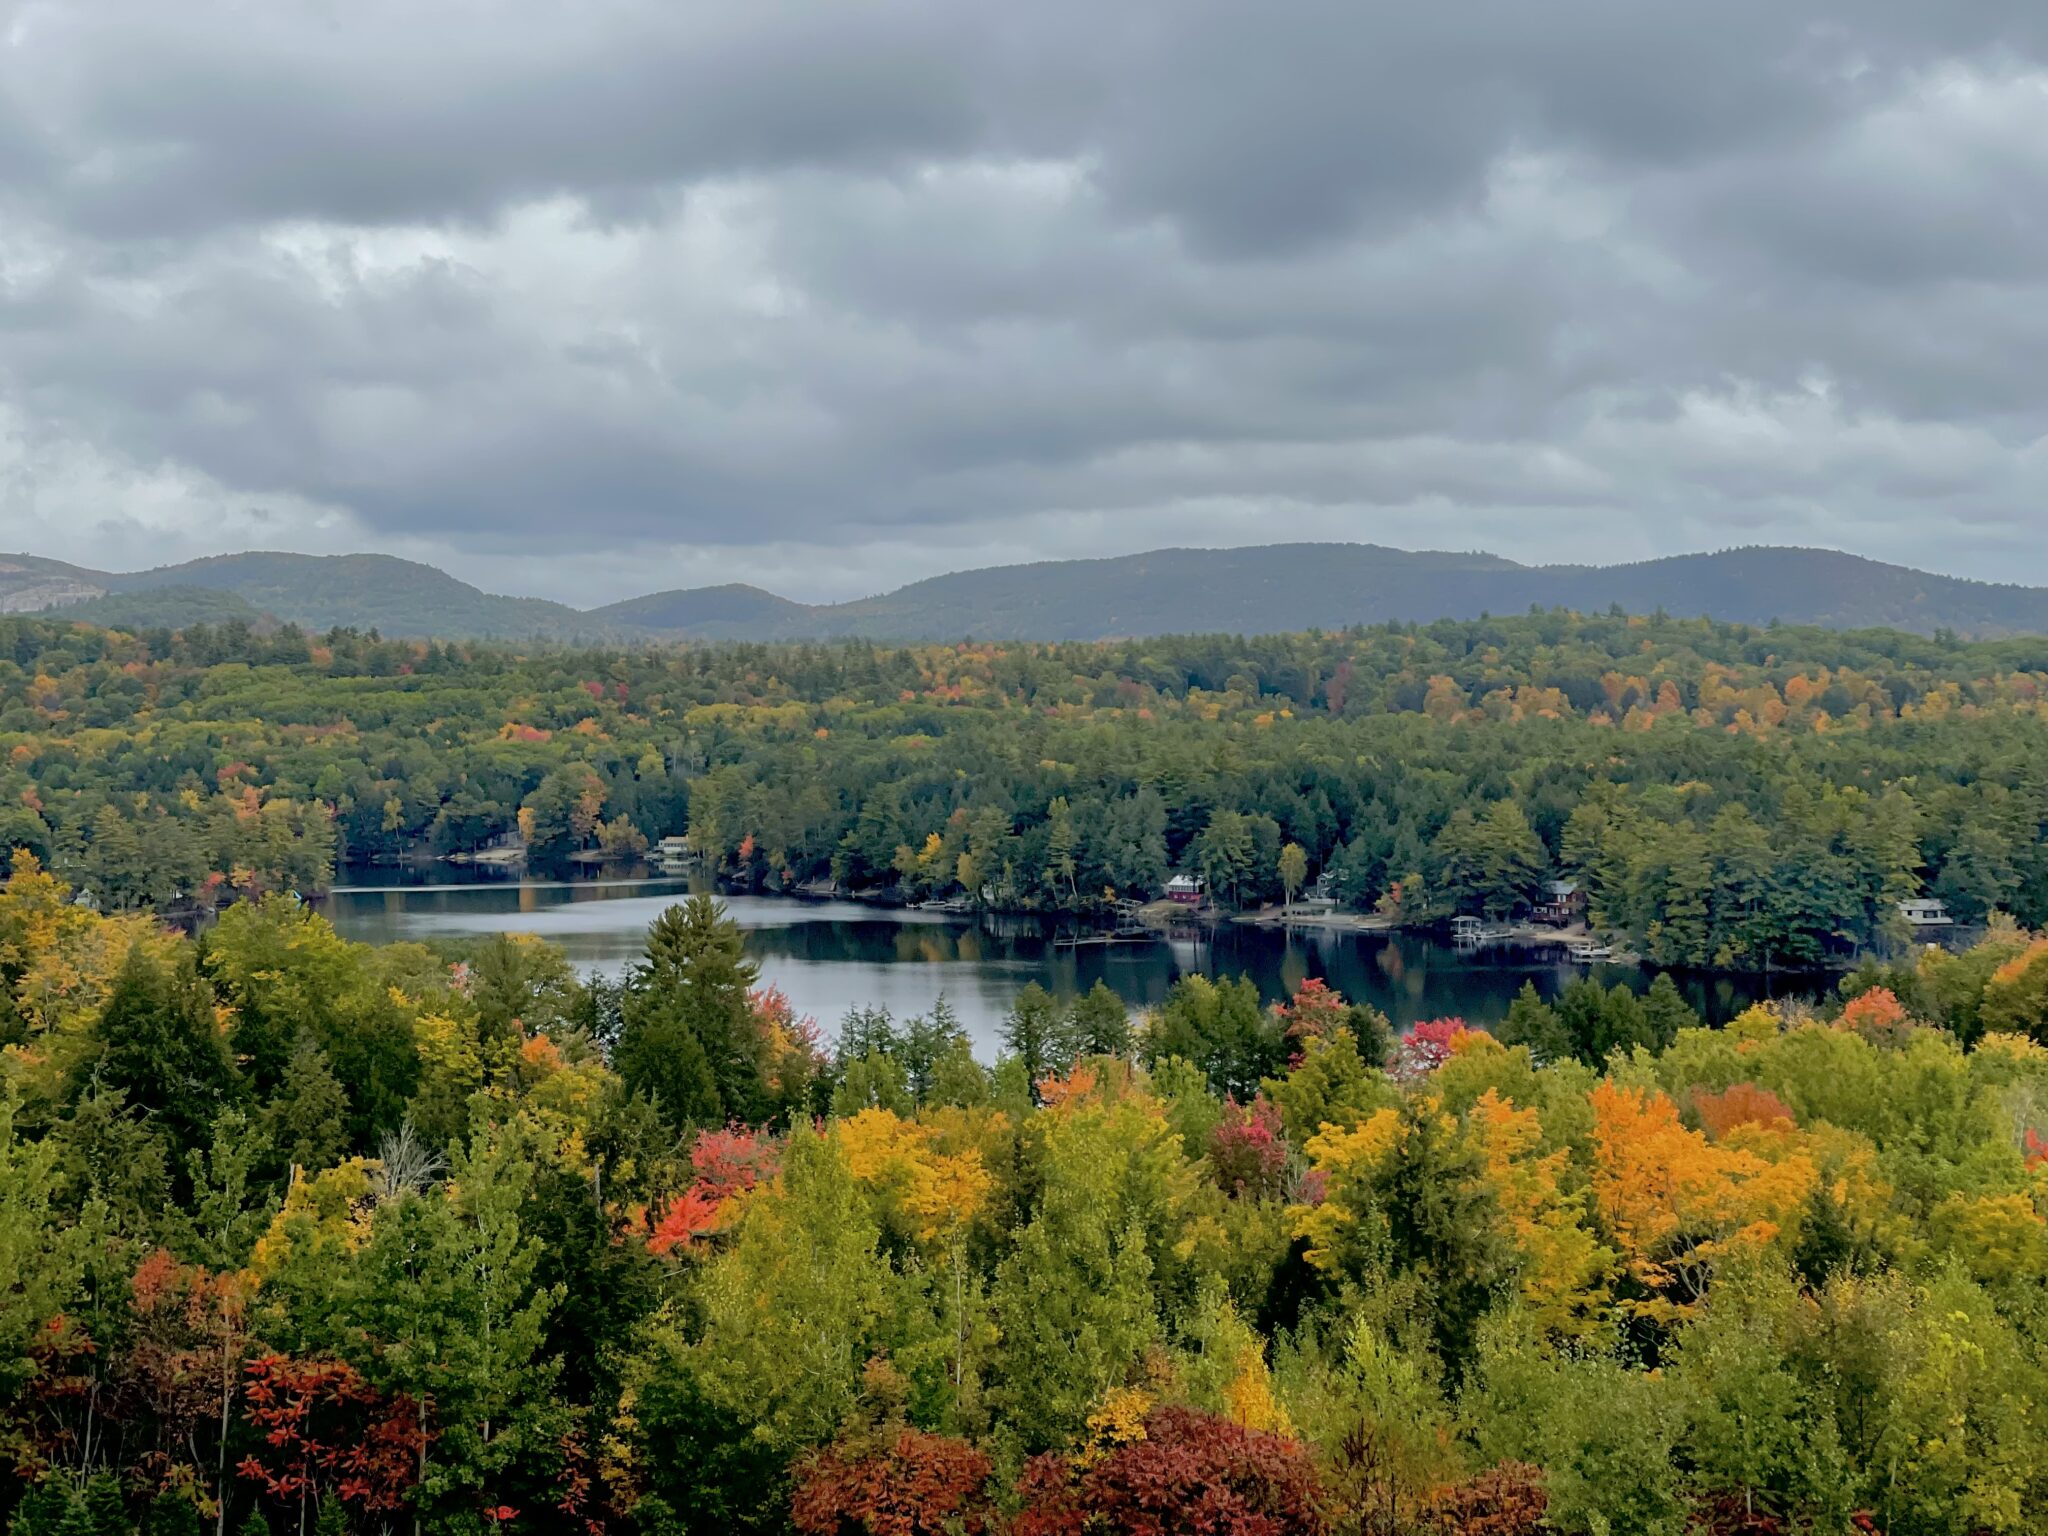 Overview of a large lake in Maine, surrounded by trees. Some trees are starting to get their fall colors